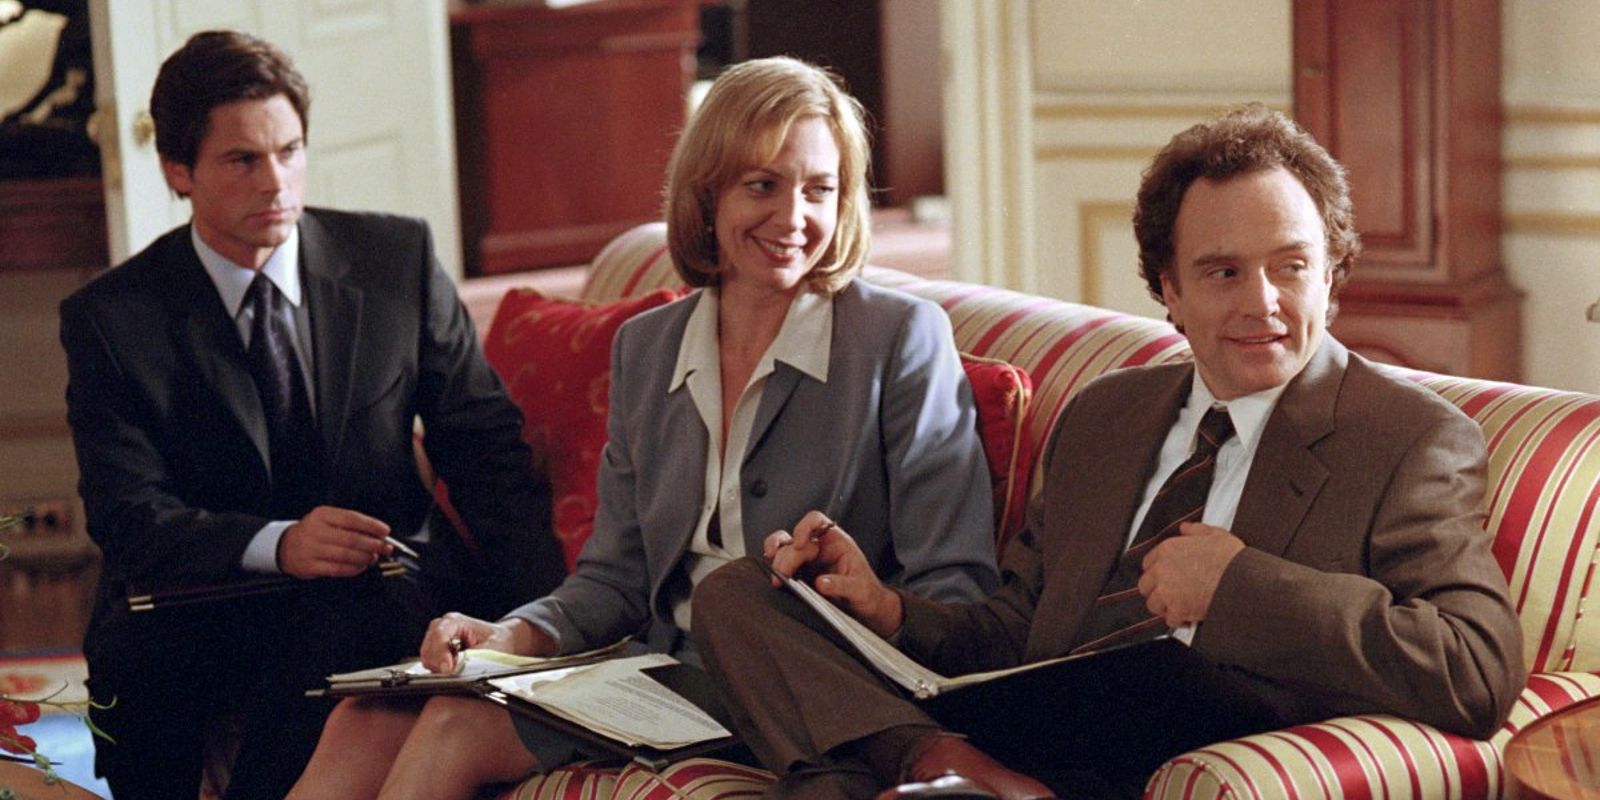 12 West Wing Storylines With Real-World Inspirations